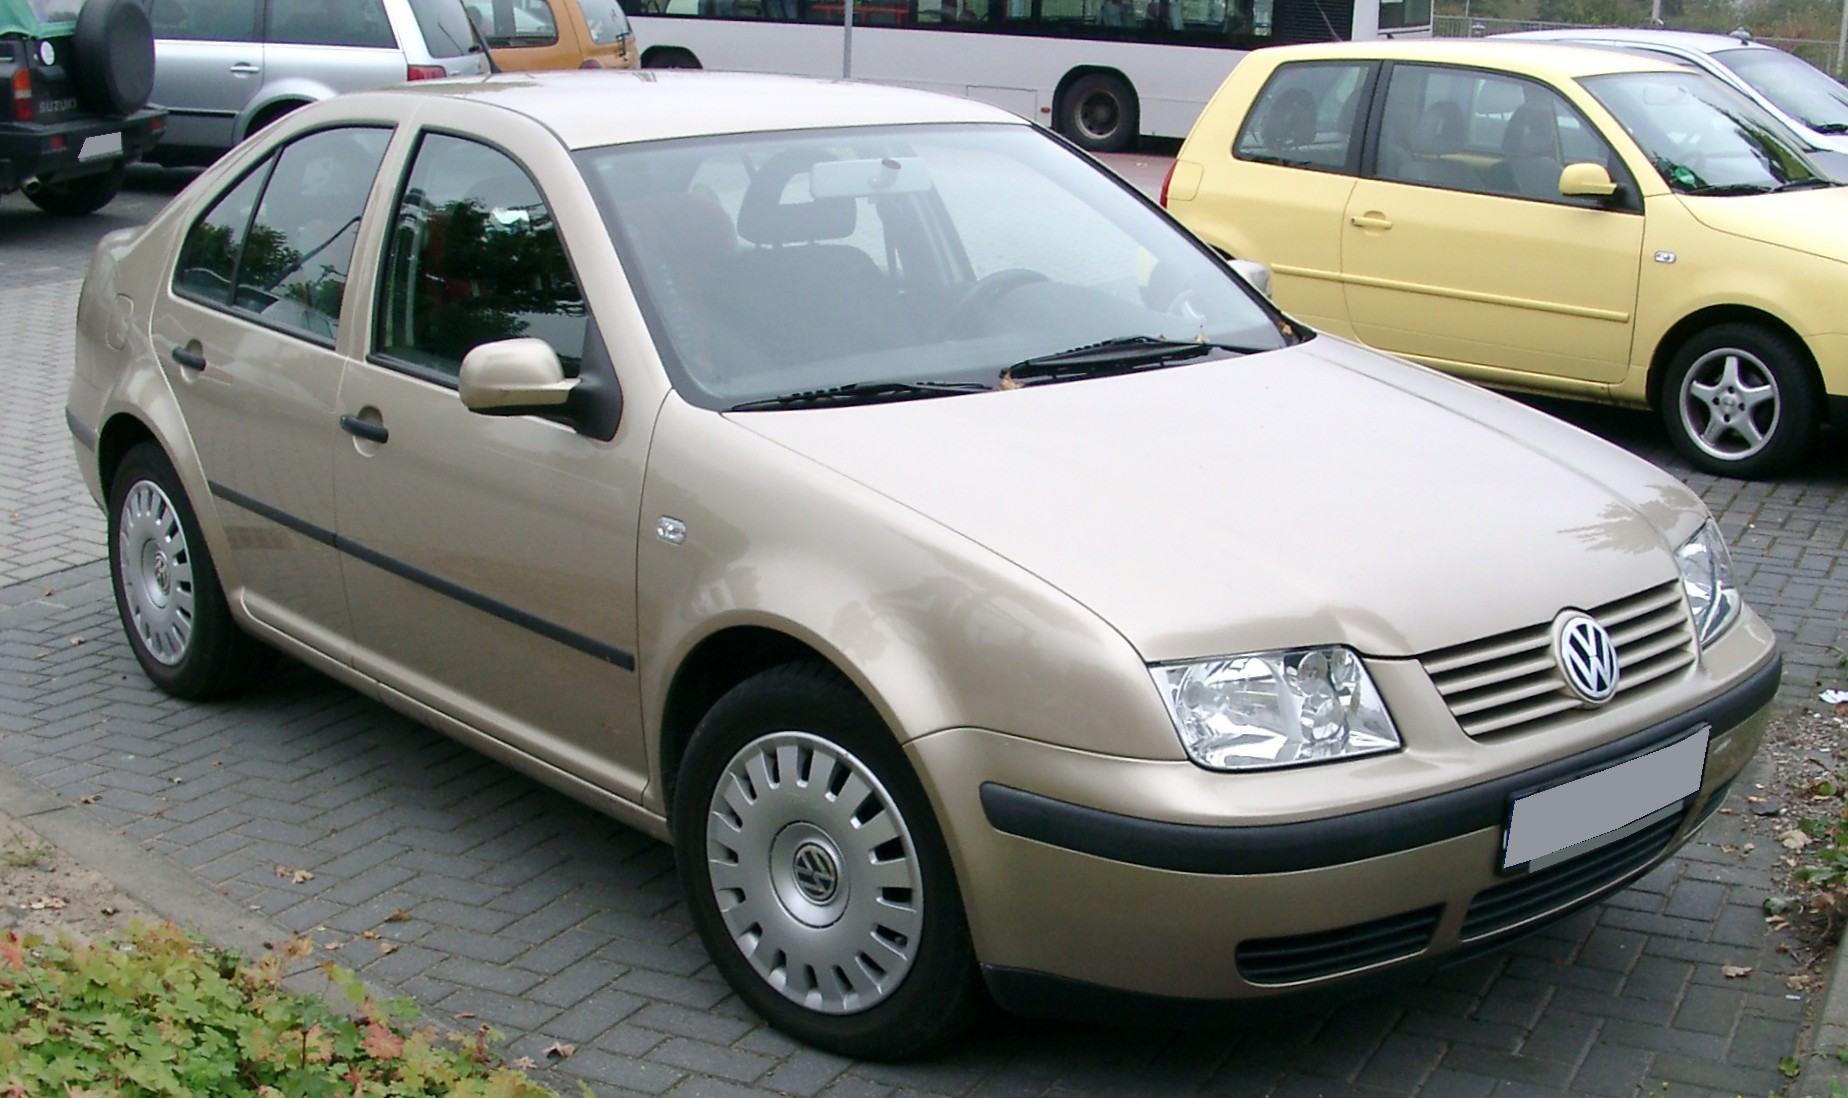 Volkswagen Bora 1998 Review, Amazing Pictures and Images